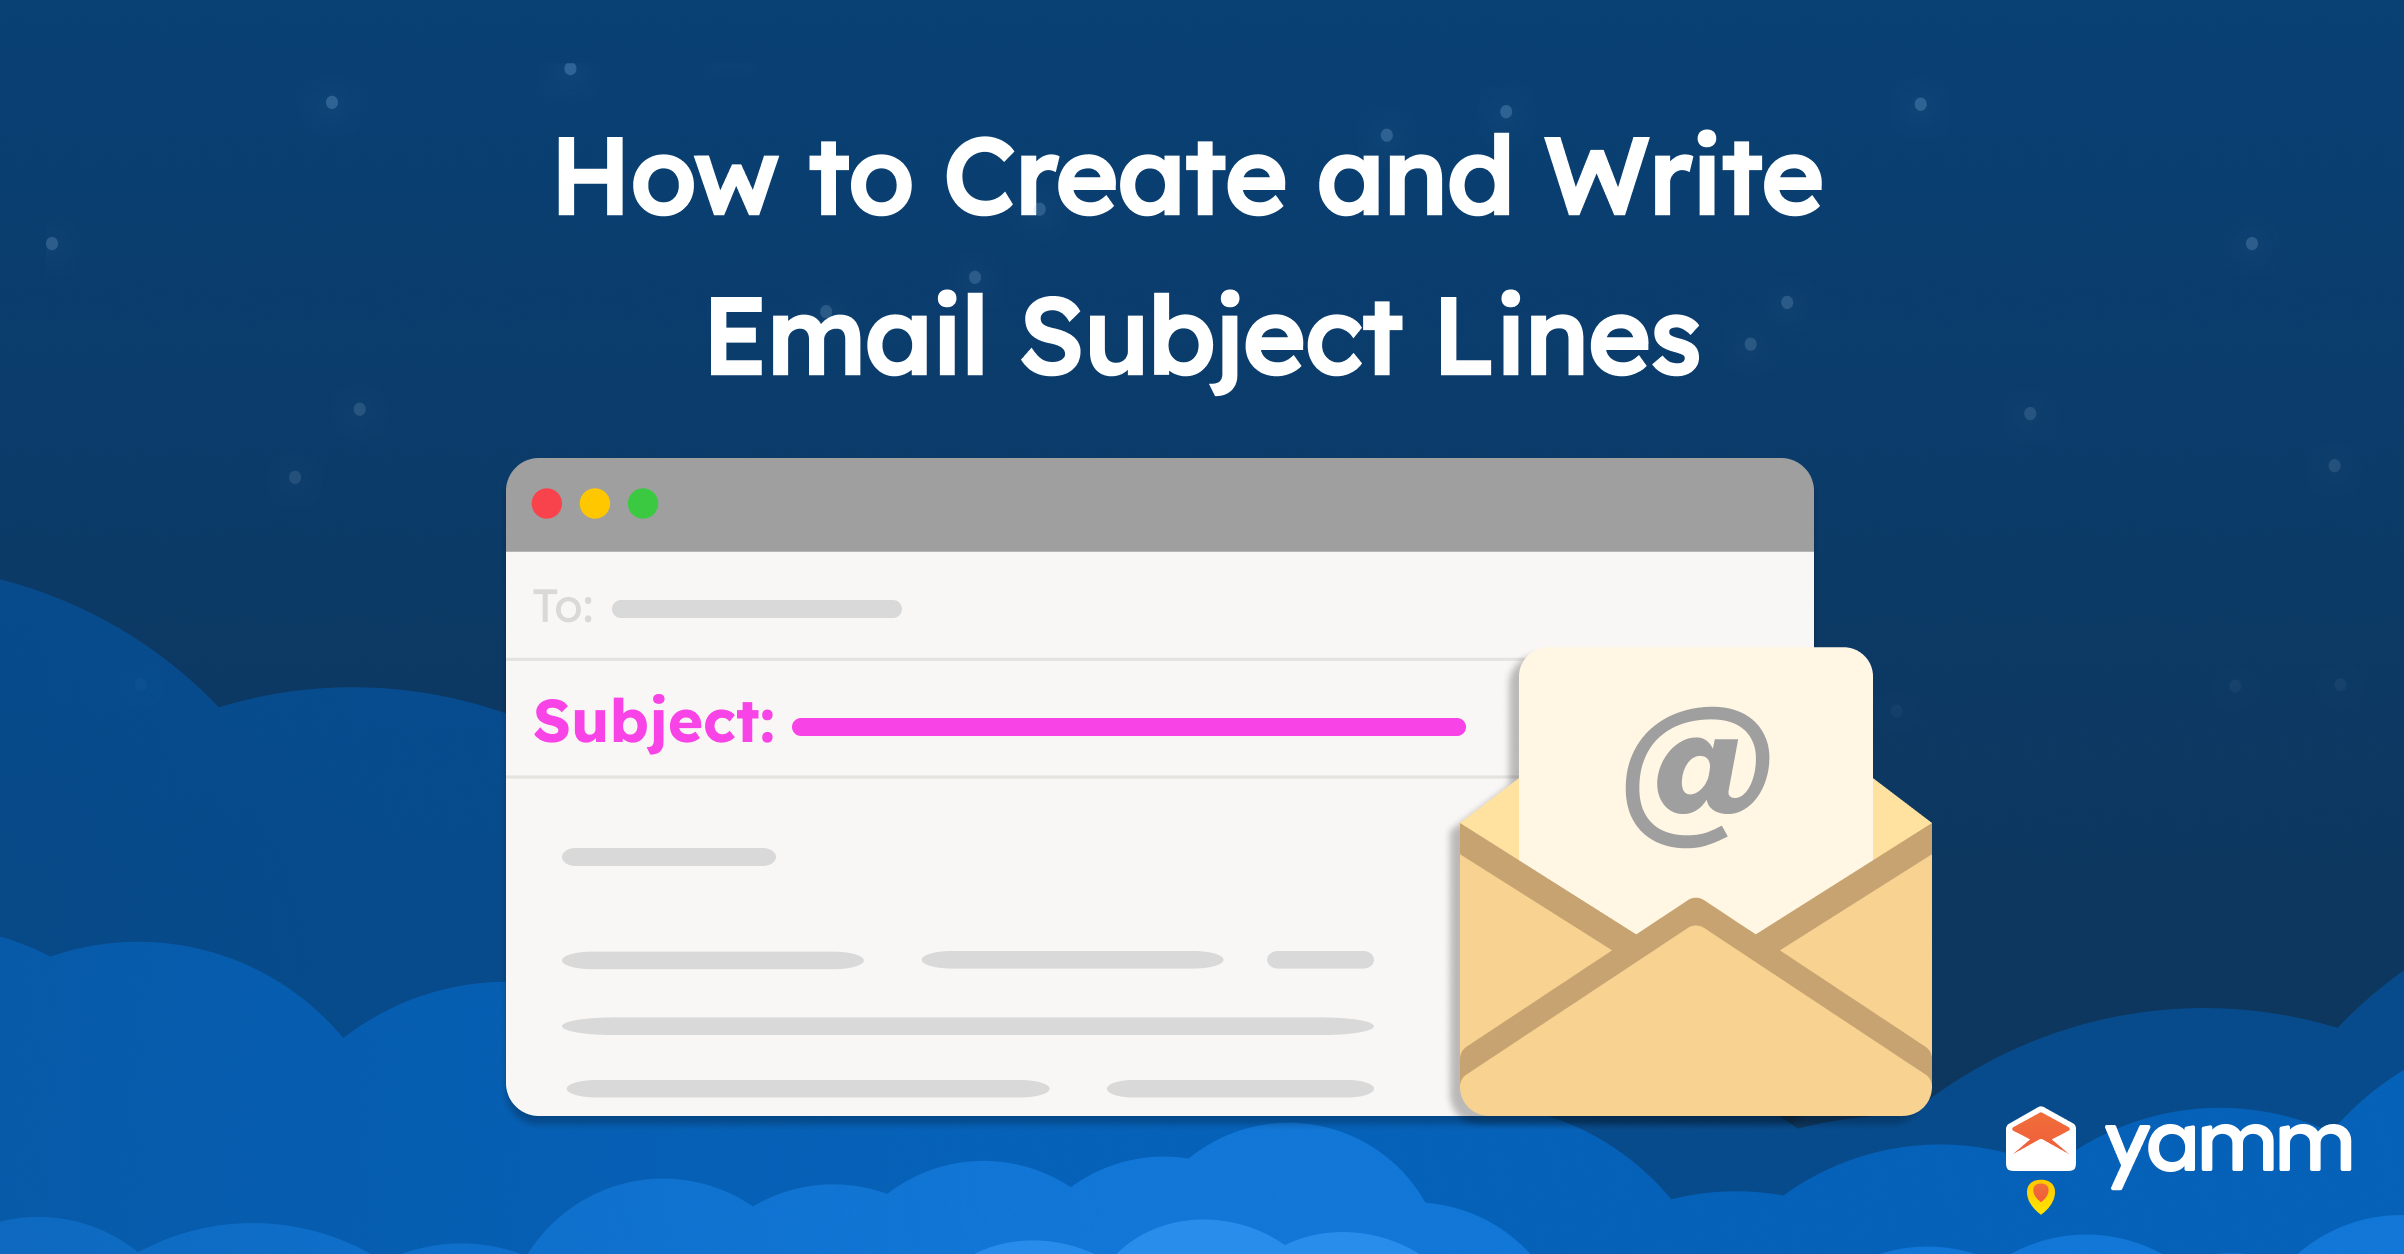 How to Create and Write Email Subject Lines